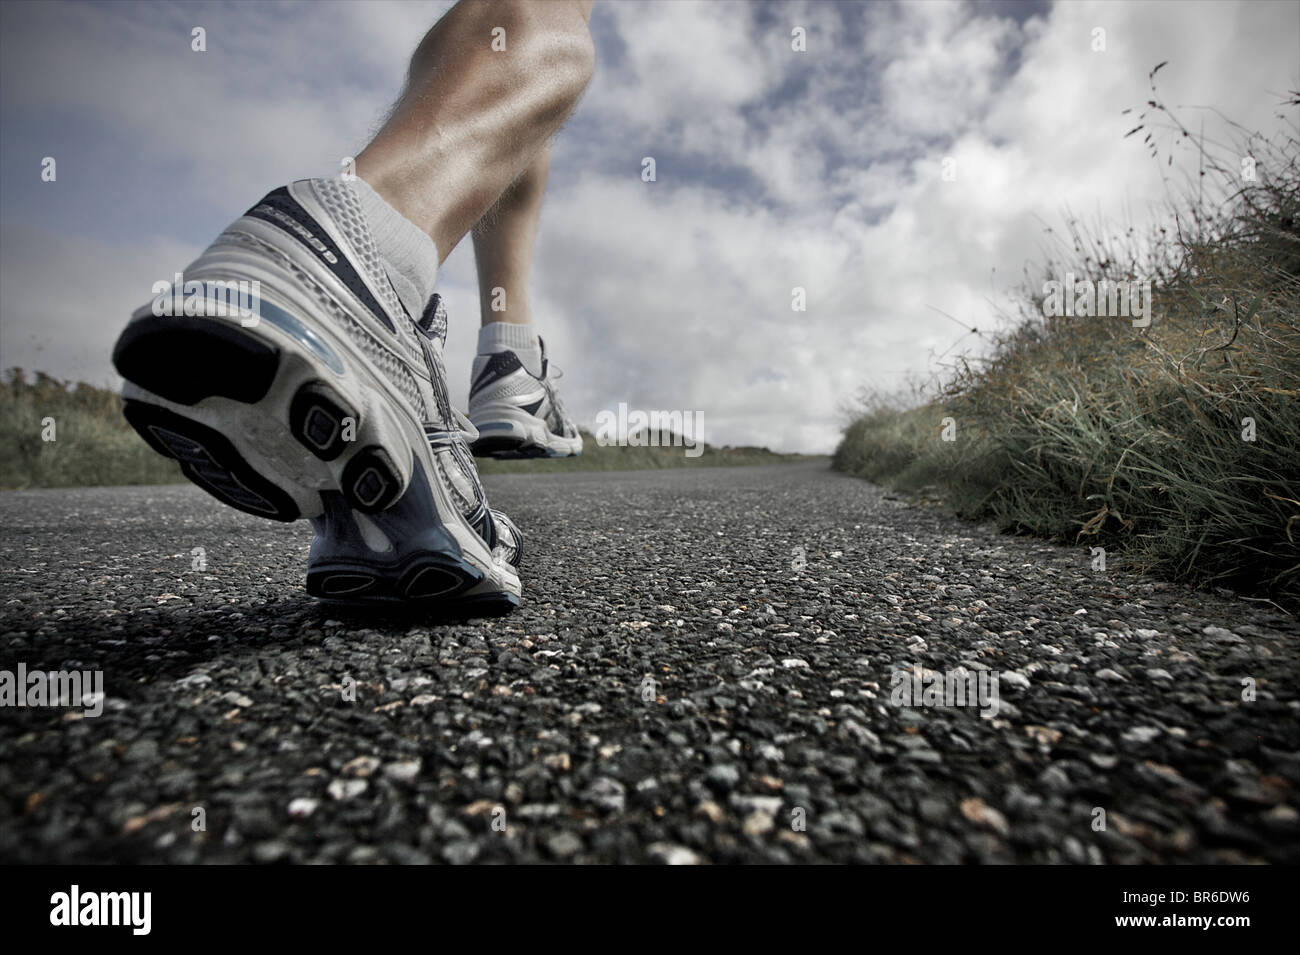 A close, low angle view of a male athlete running along a tarmac road with his large leg muscles showing Stock Photo